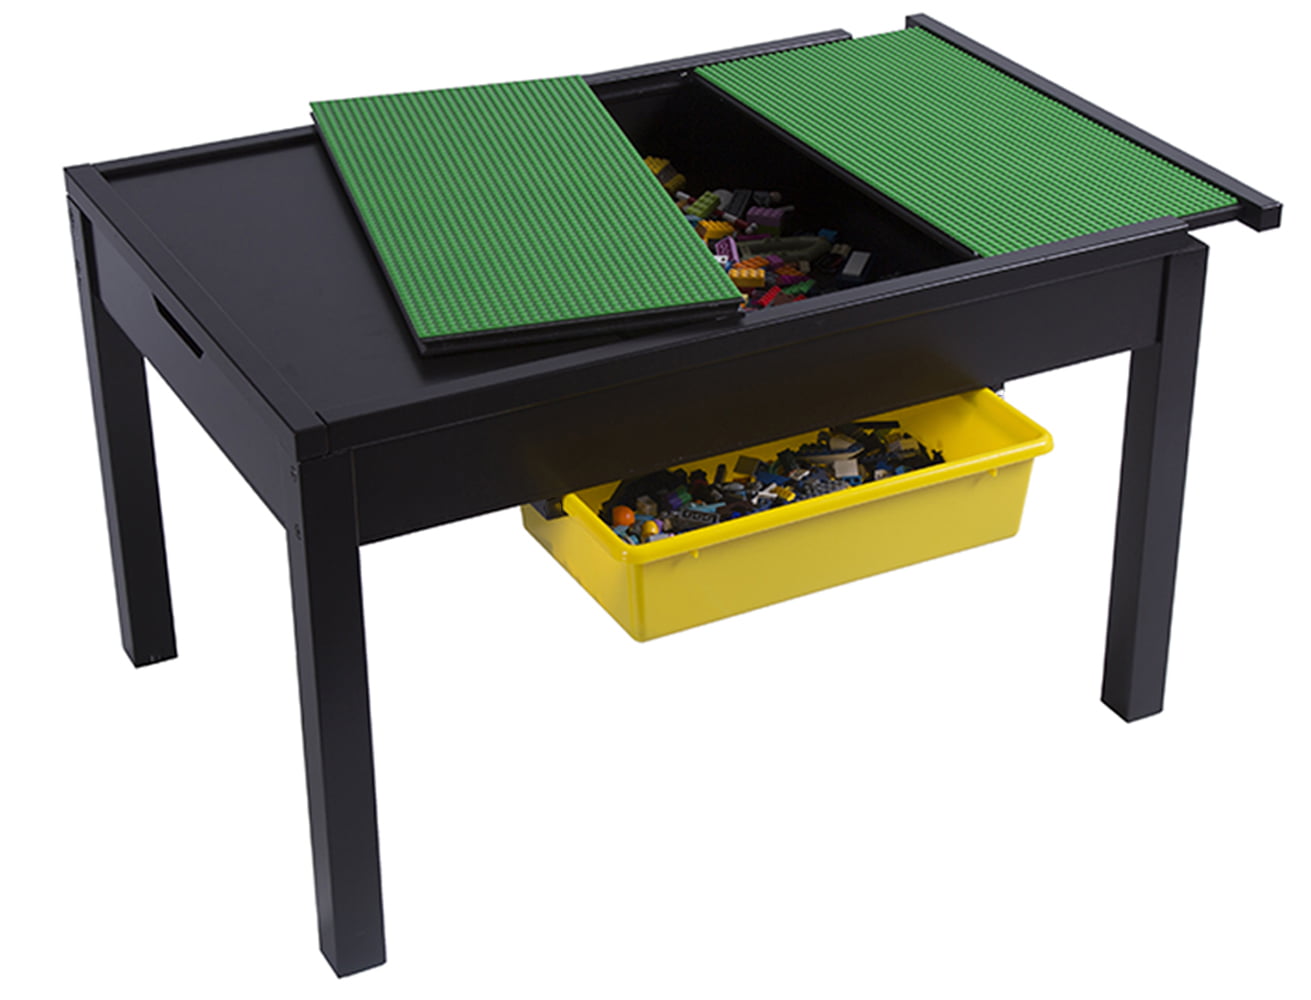 Lego Table – center storage pocket – The Queen of Games